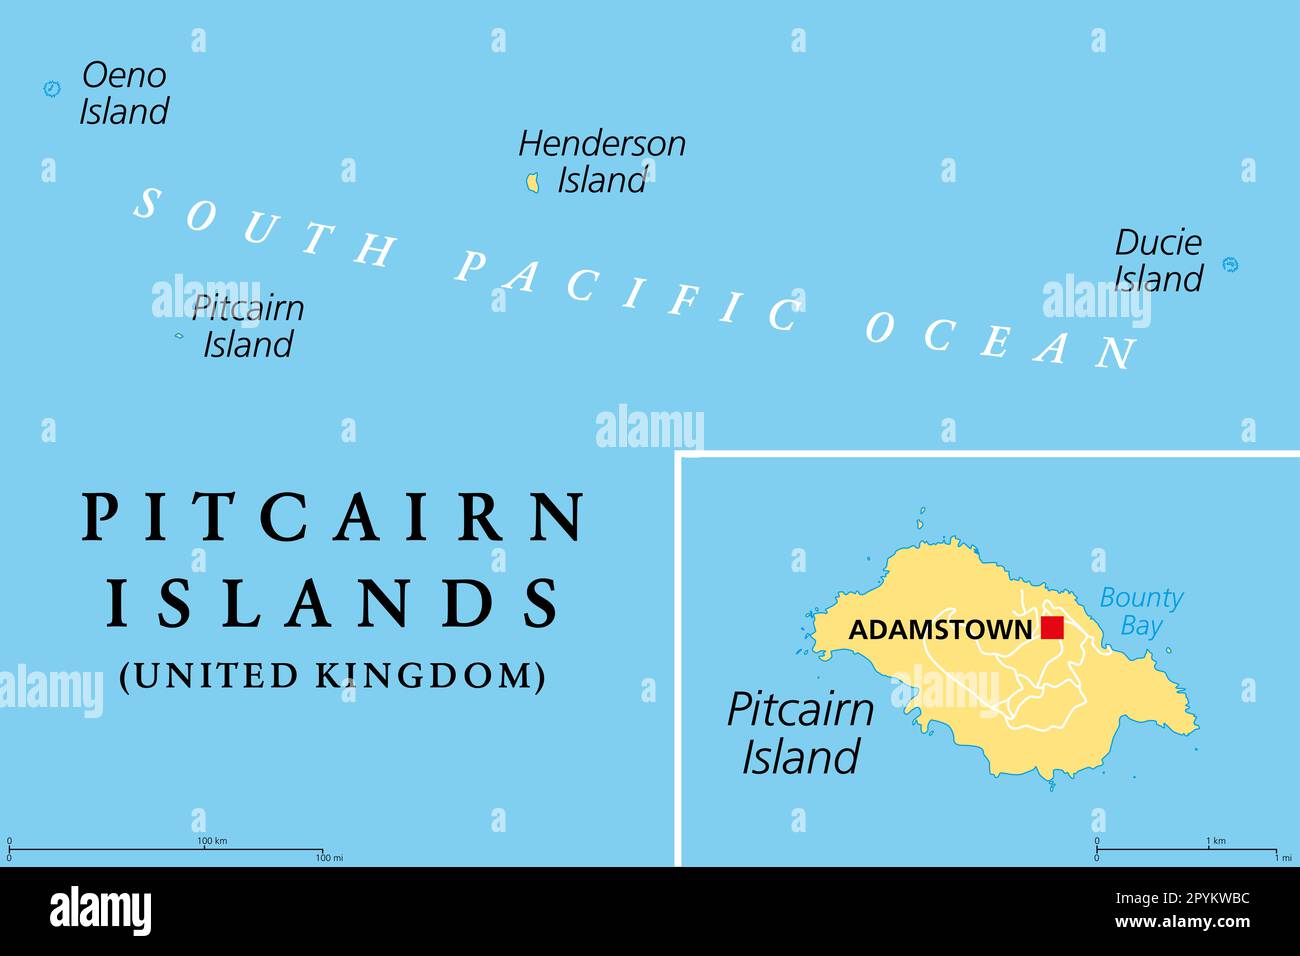 Pitcairn Islands, a British Overseas Territory, political map. Pitcairn, Henderson, Ducie and Oeno Islands. South Pacific volcanic island group. Stock Photo